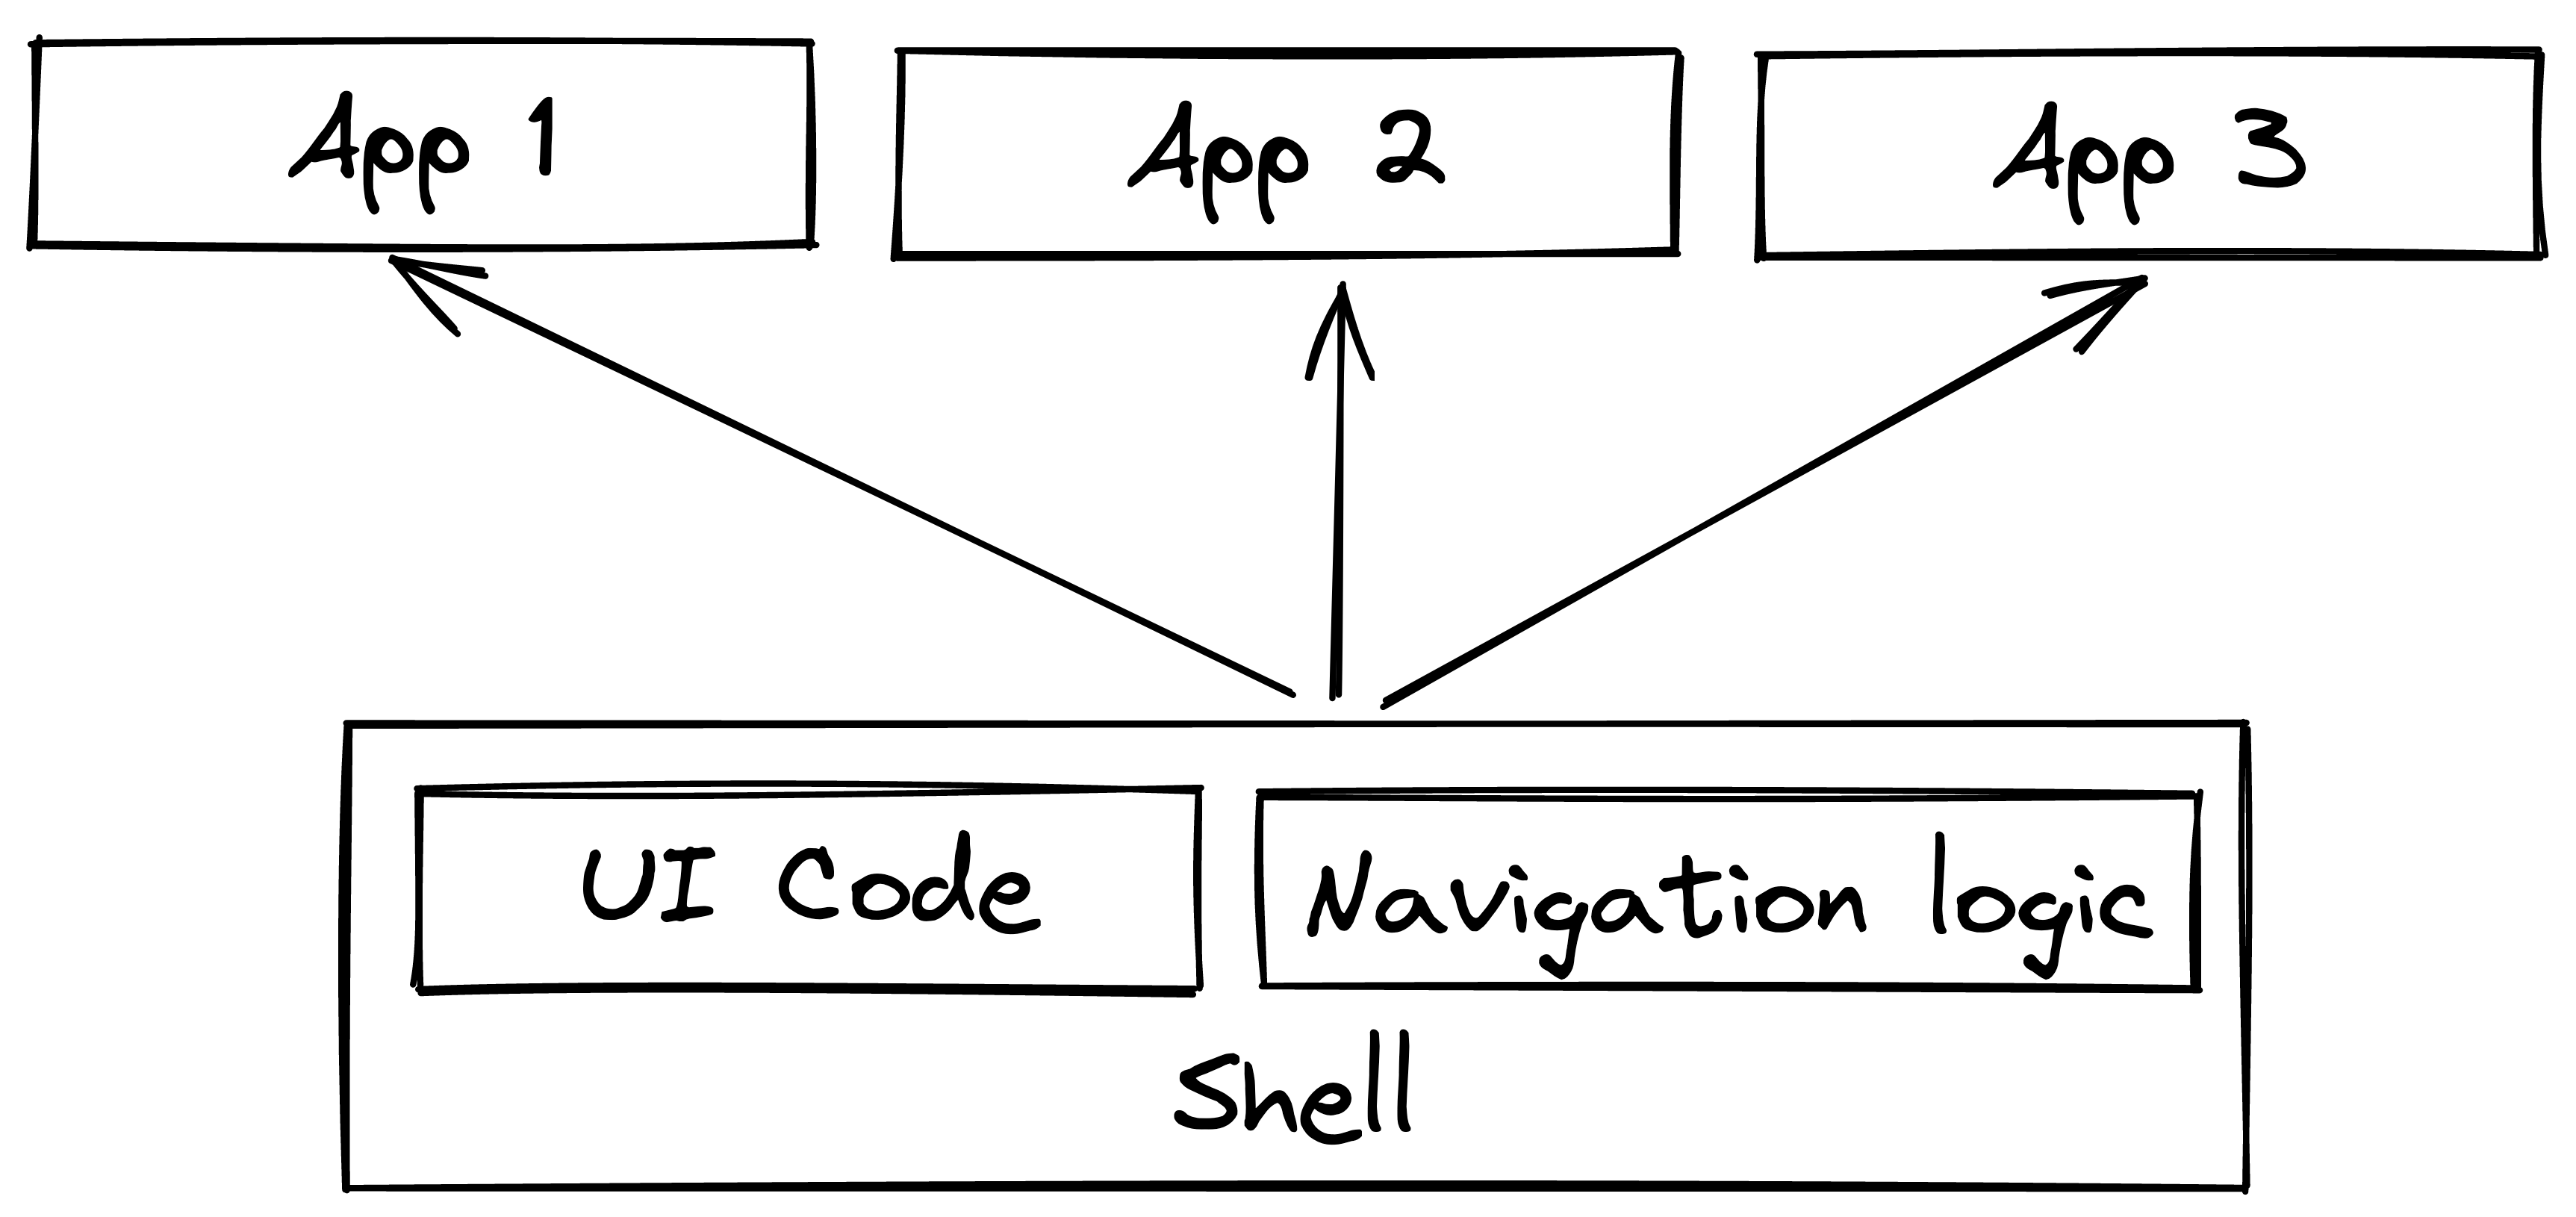 Diagram showing a shell based architecture with three micro apps